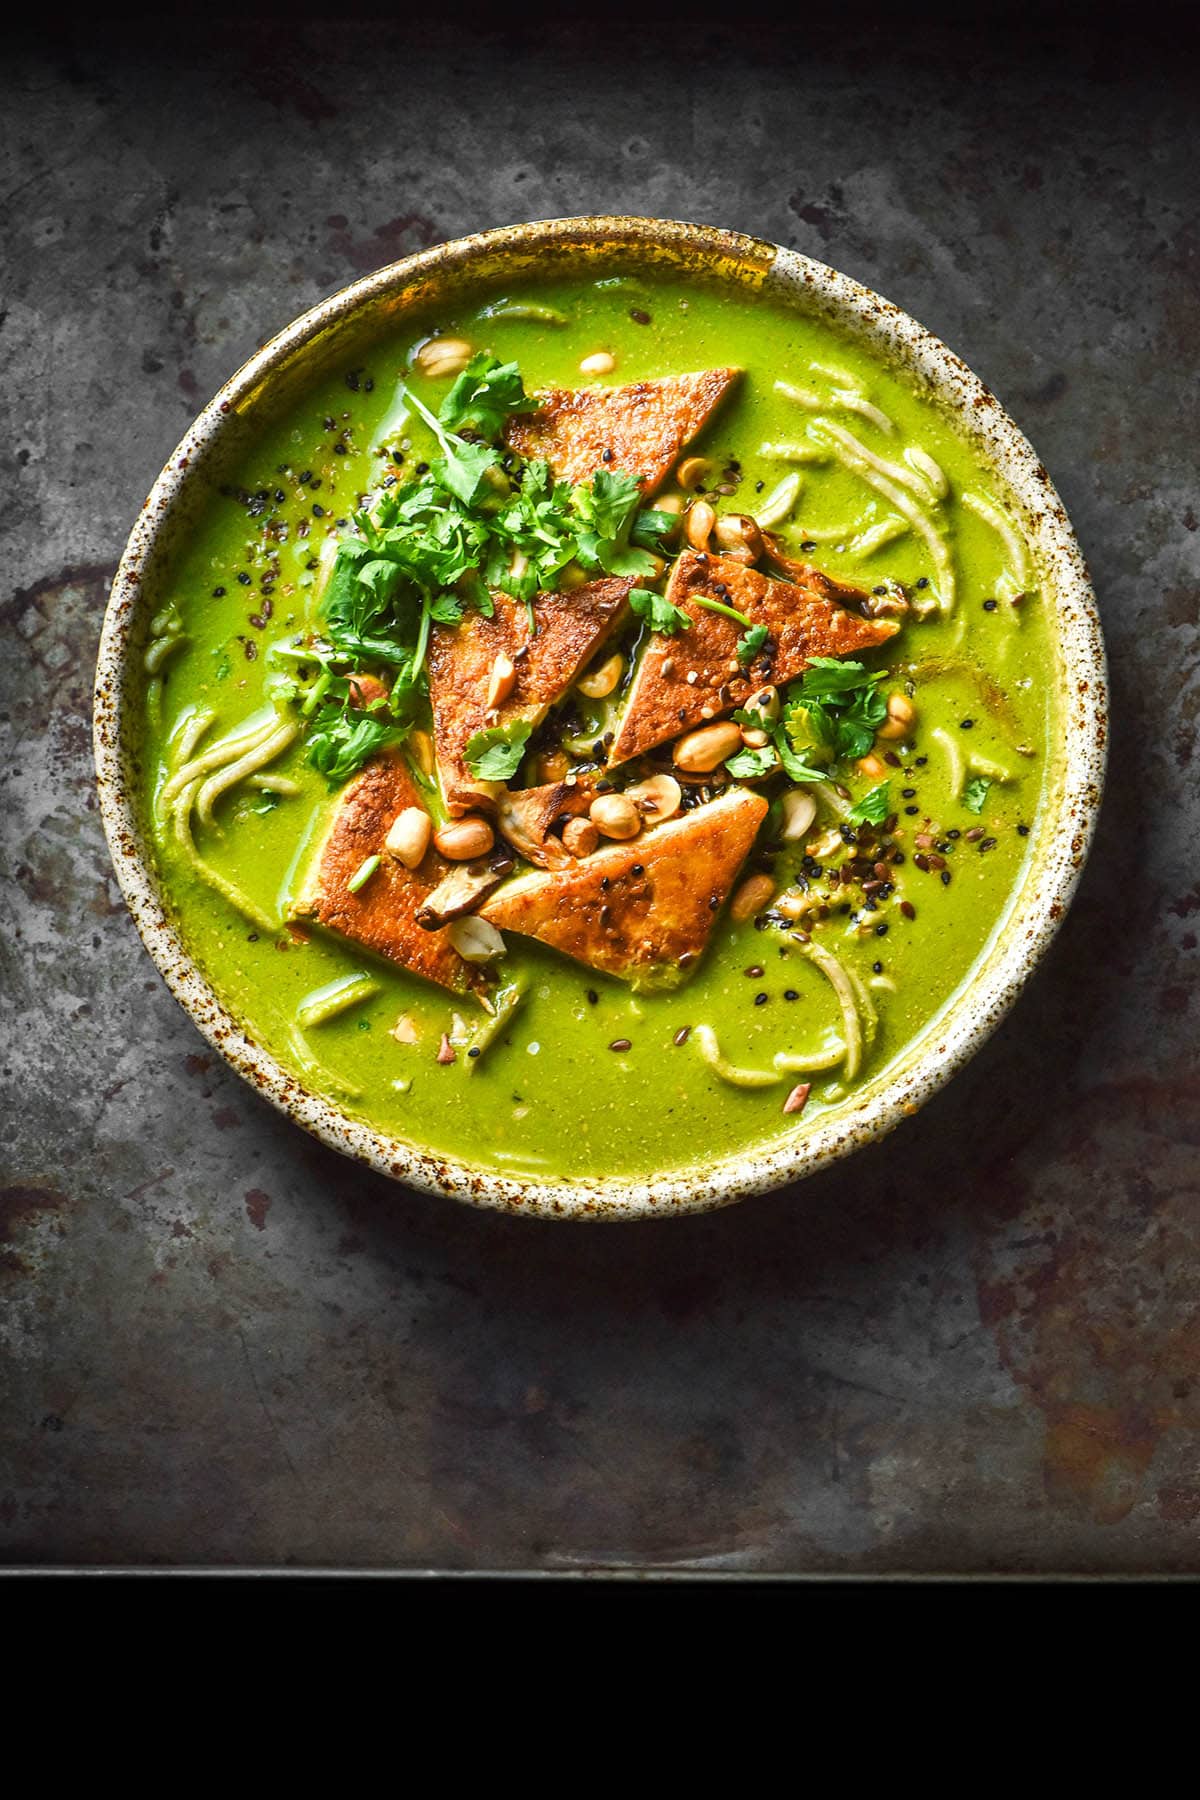 An aerial image of a bowl of low FODMAP green soup on a dark steel backdrop. The green soup is topped with cooked tofu triangles, peanuts, seeds and extra coriander. Noodles pot out from underneath the bright green broth.